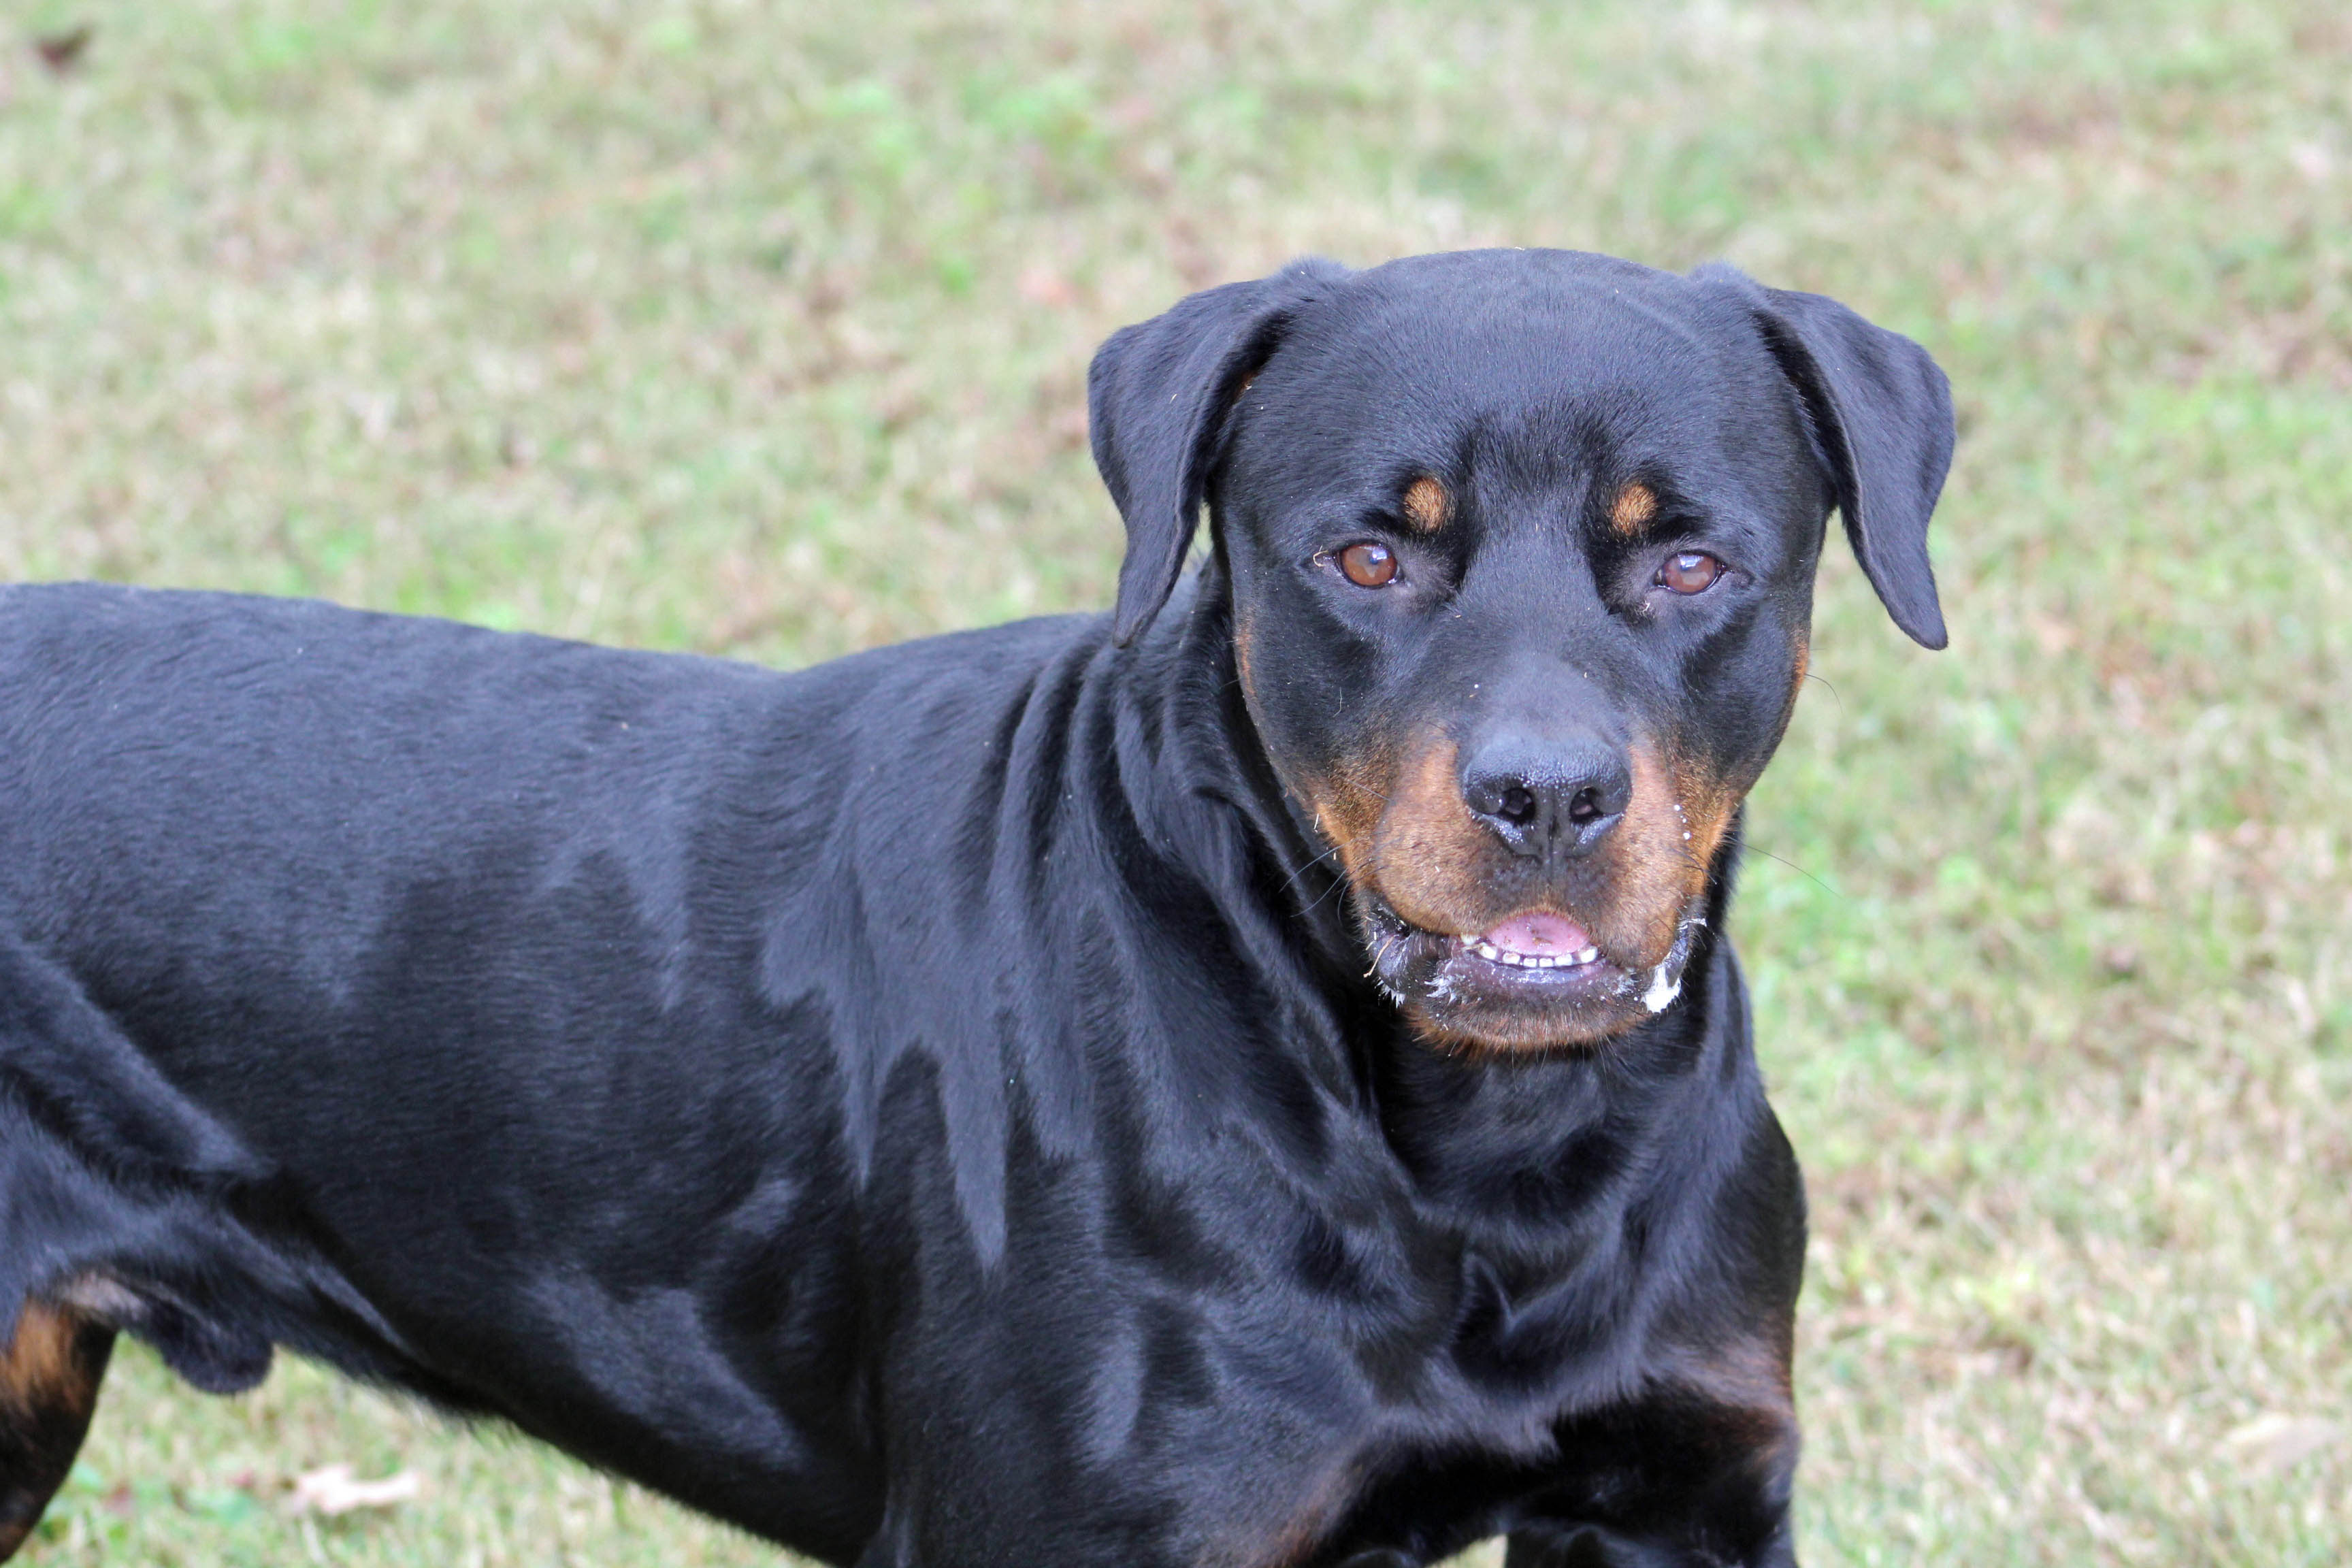 Southern States Rescued Rottweilers